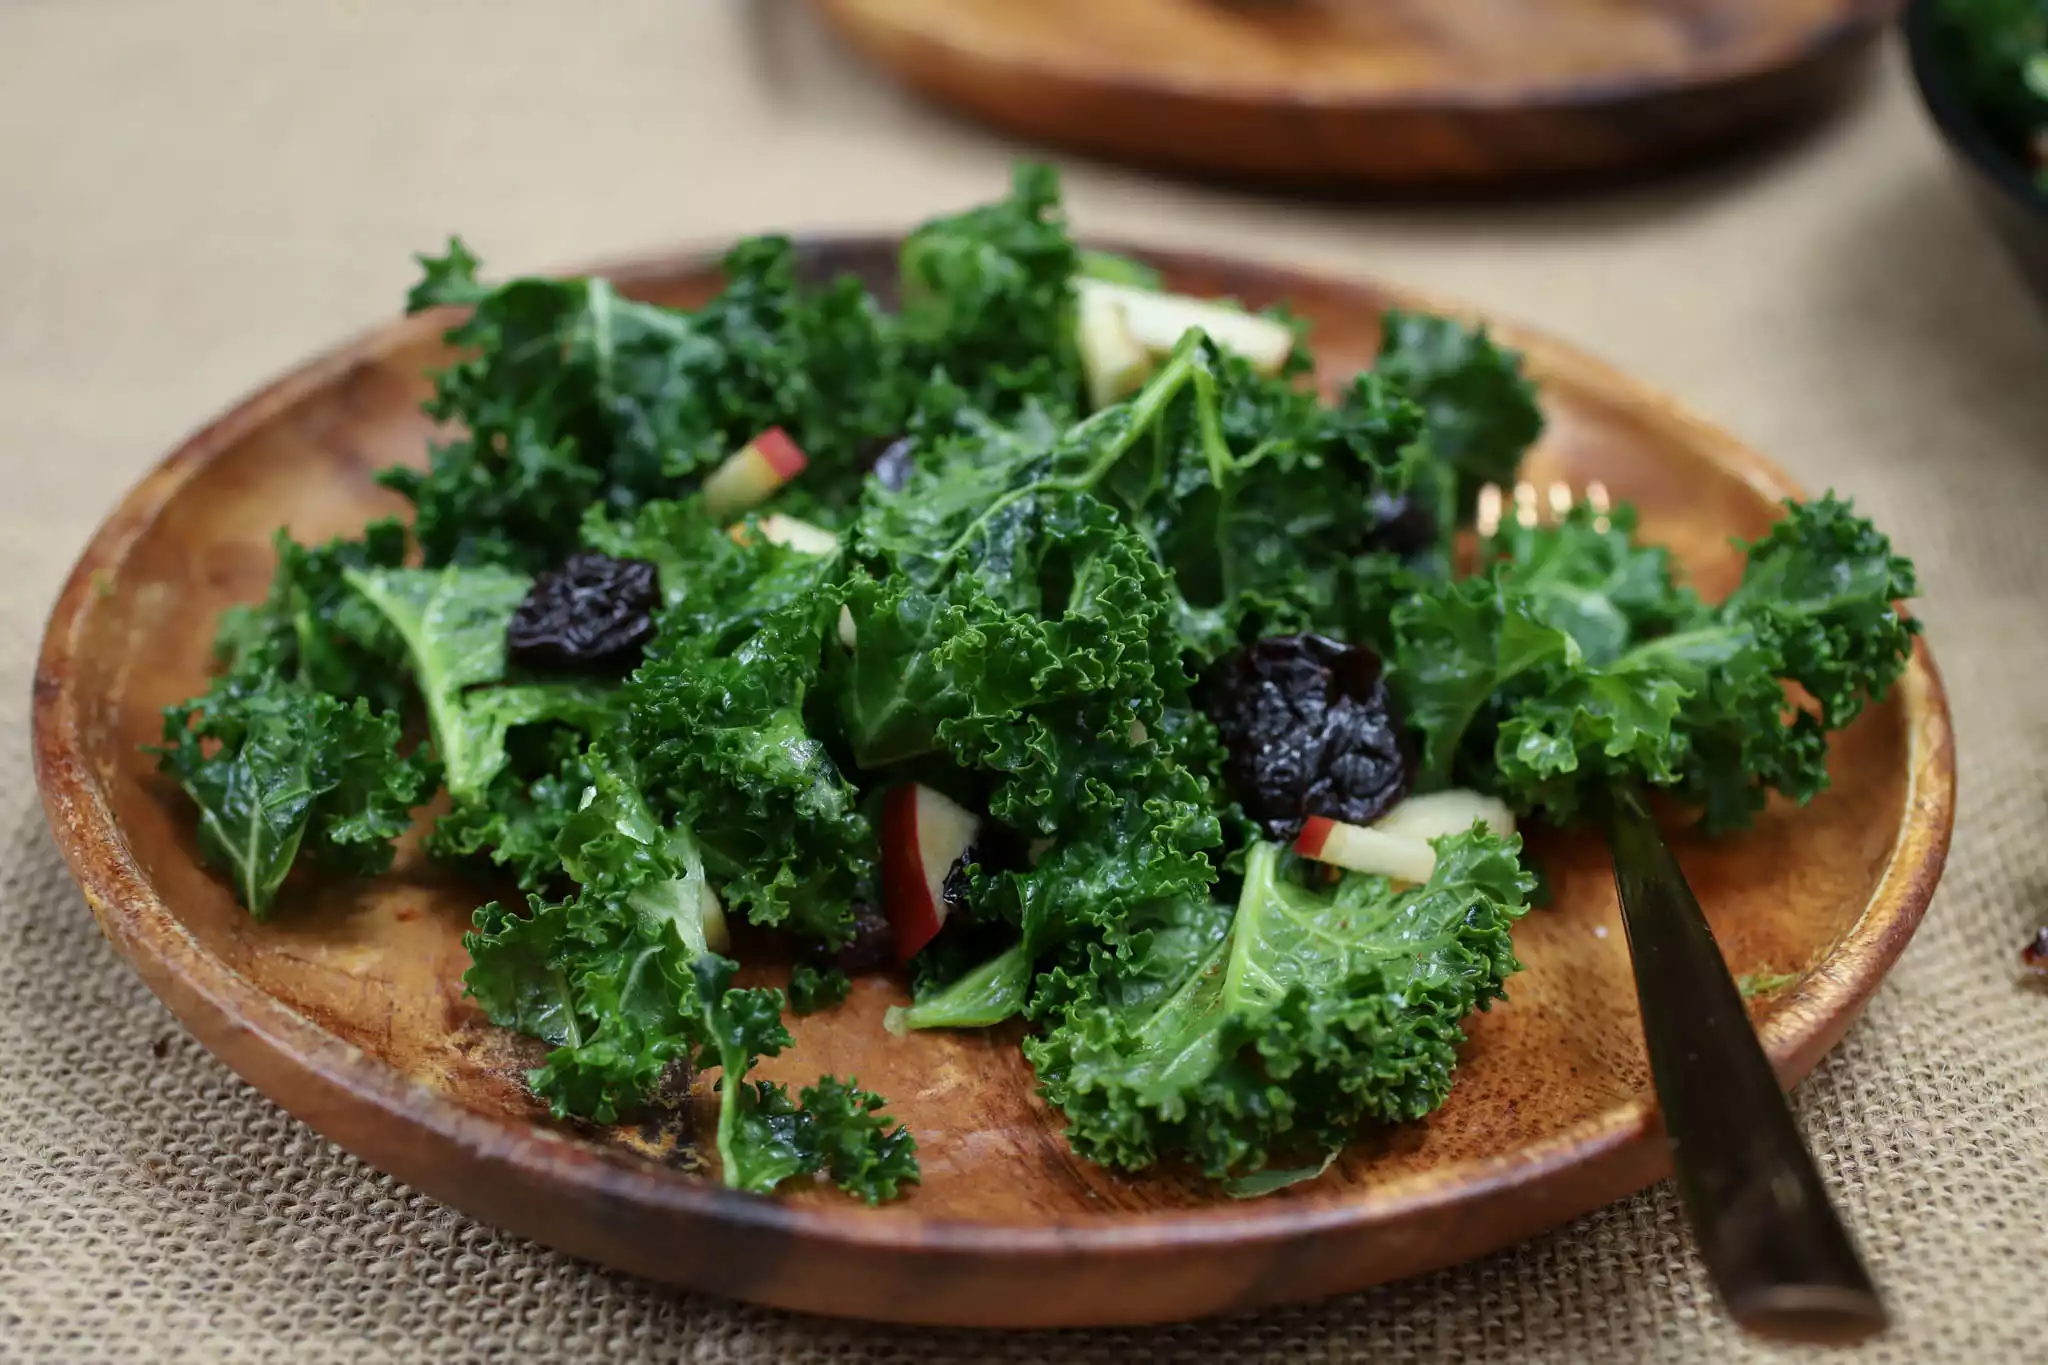 kale salad on a wooden plate